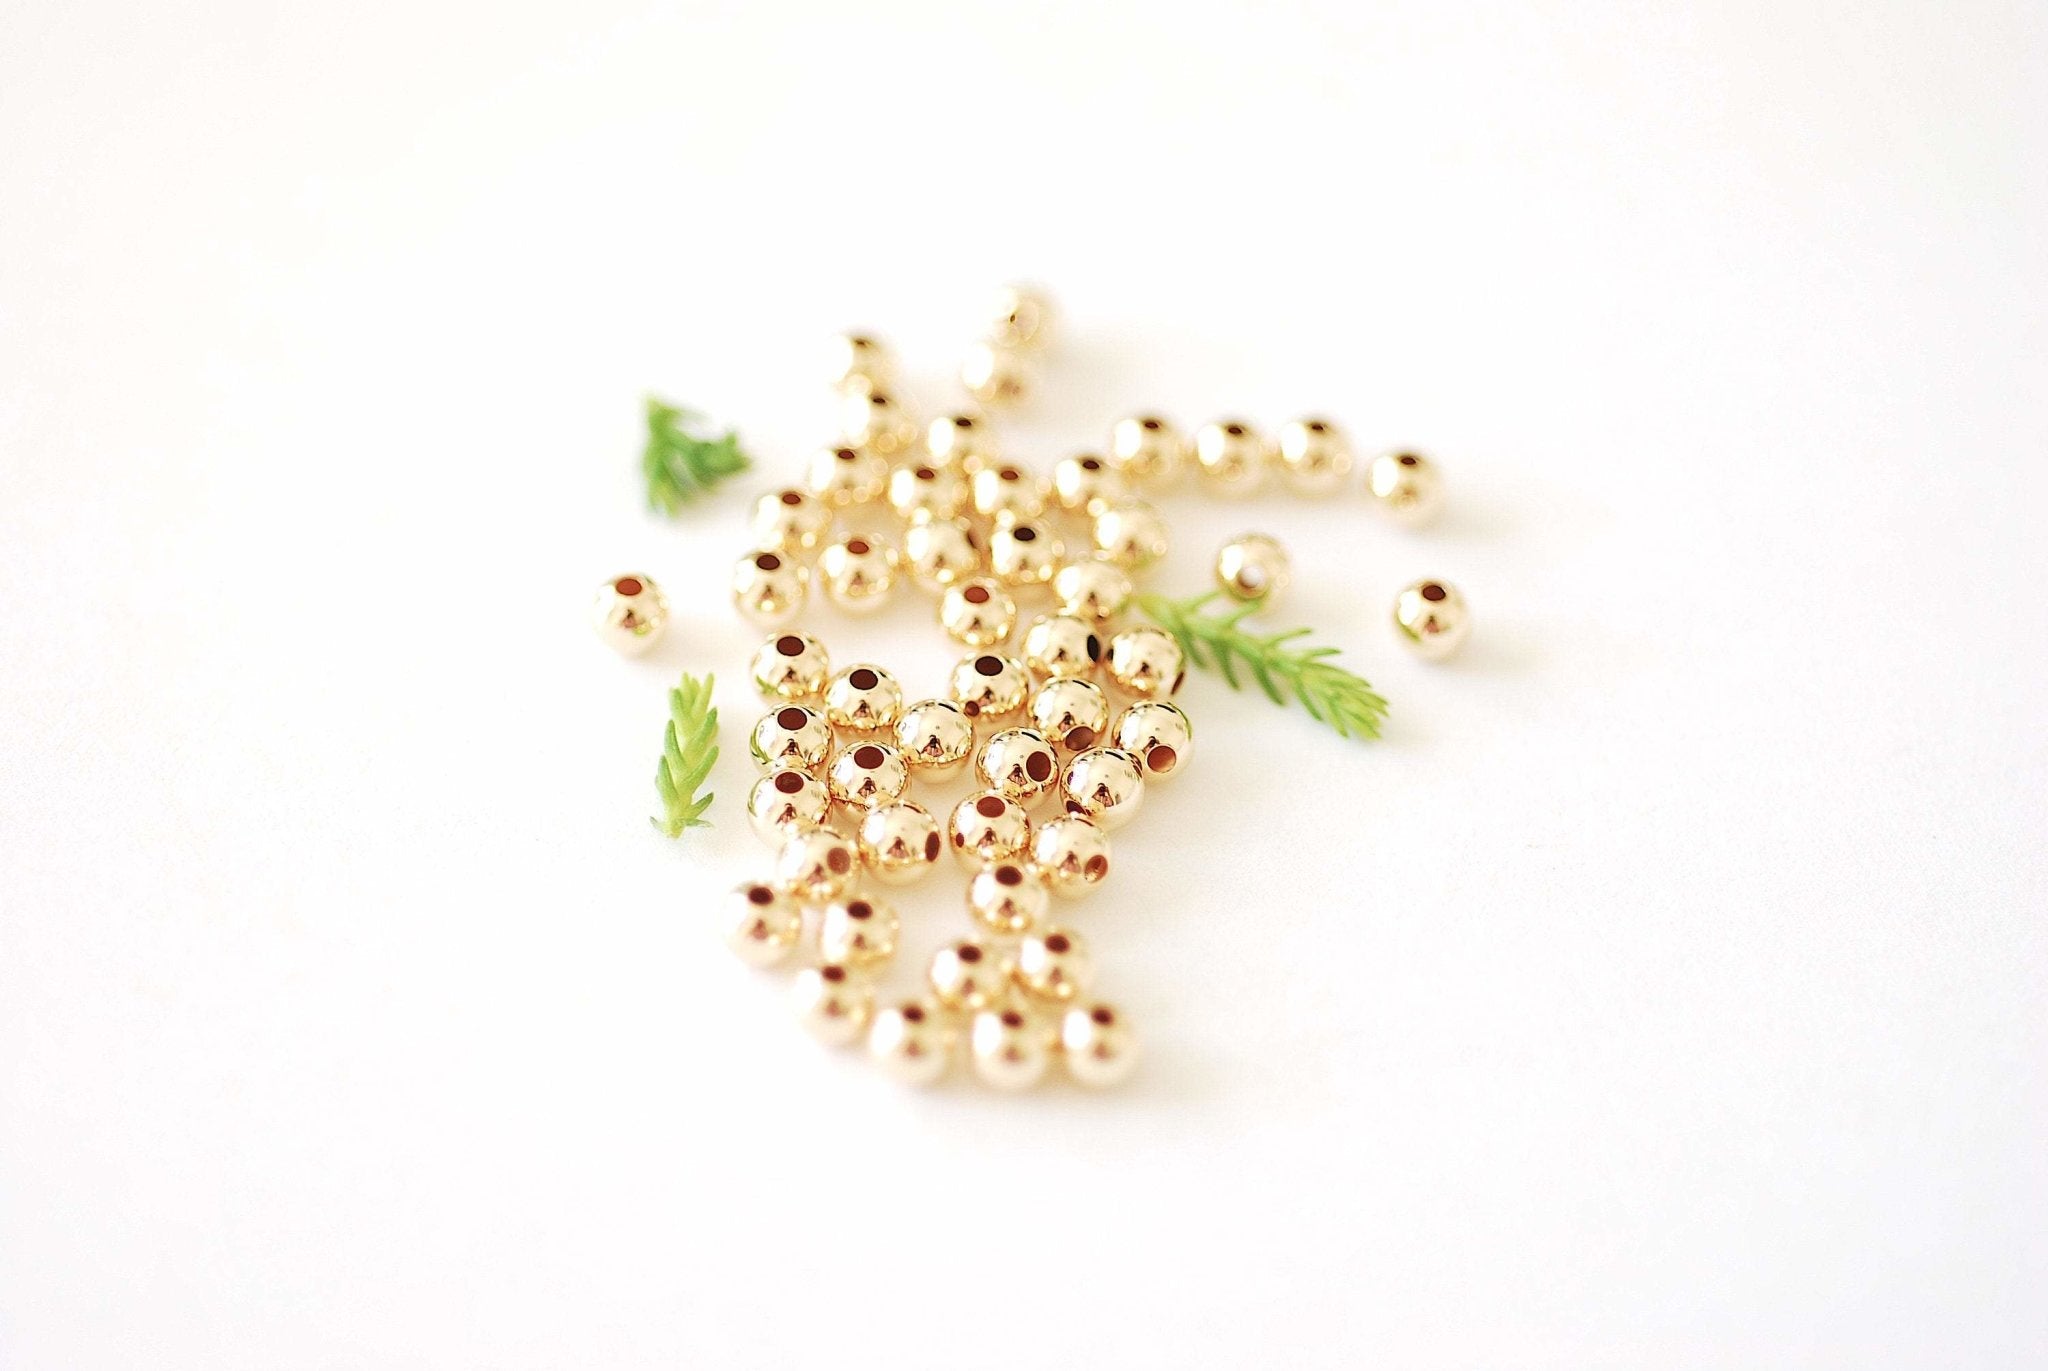 5.0mm Bead Gold-Filled 1.5mm Hole, (10 Pack) Wholesale Jewelry Making Beads - HarperCrown